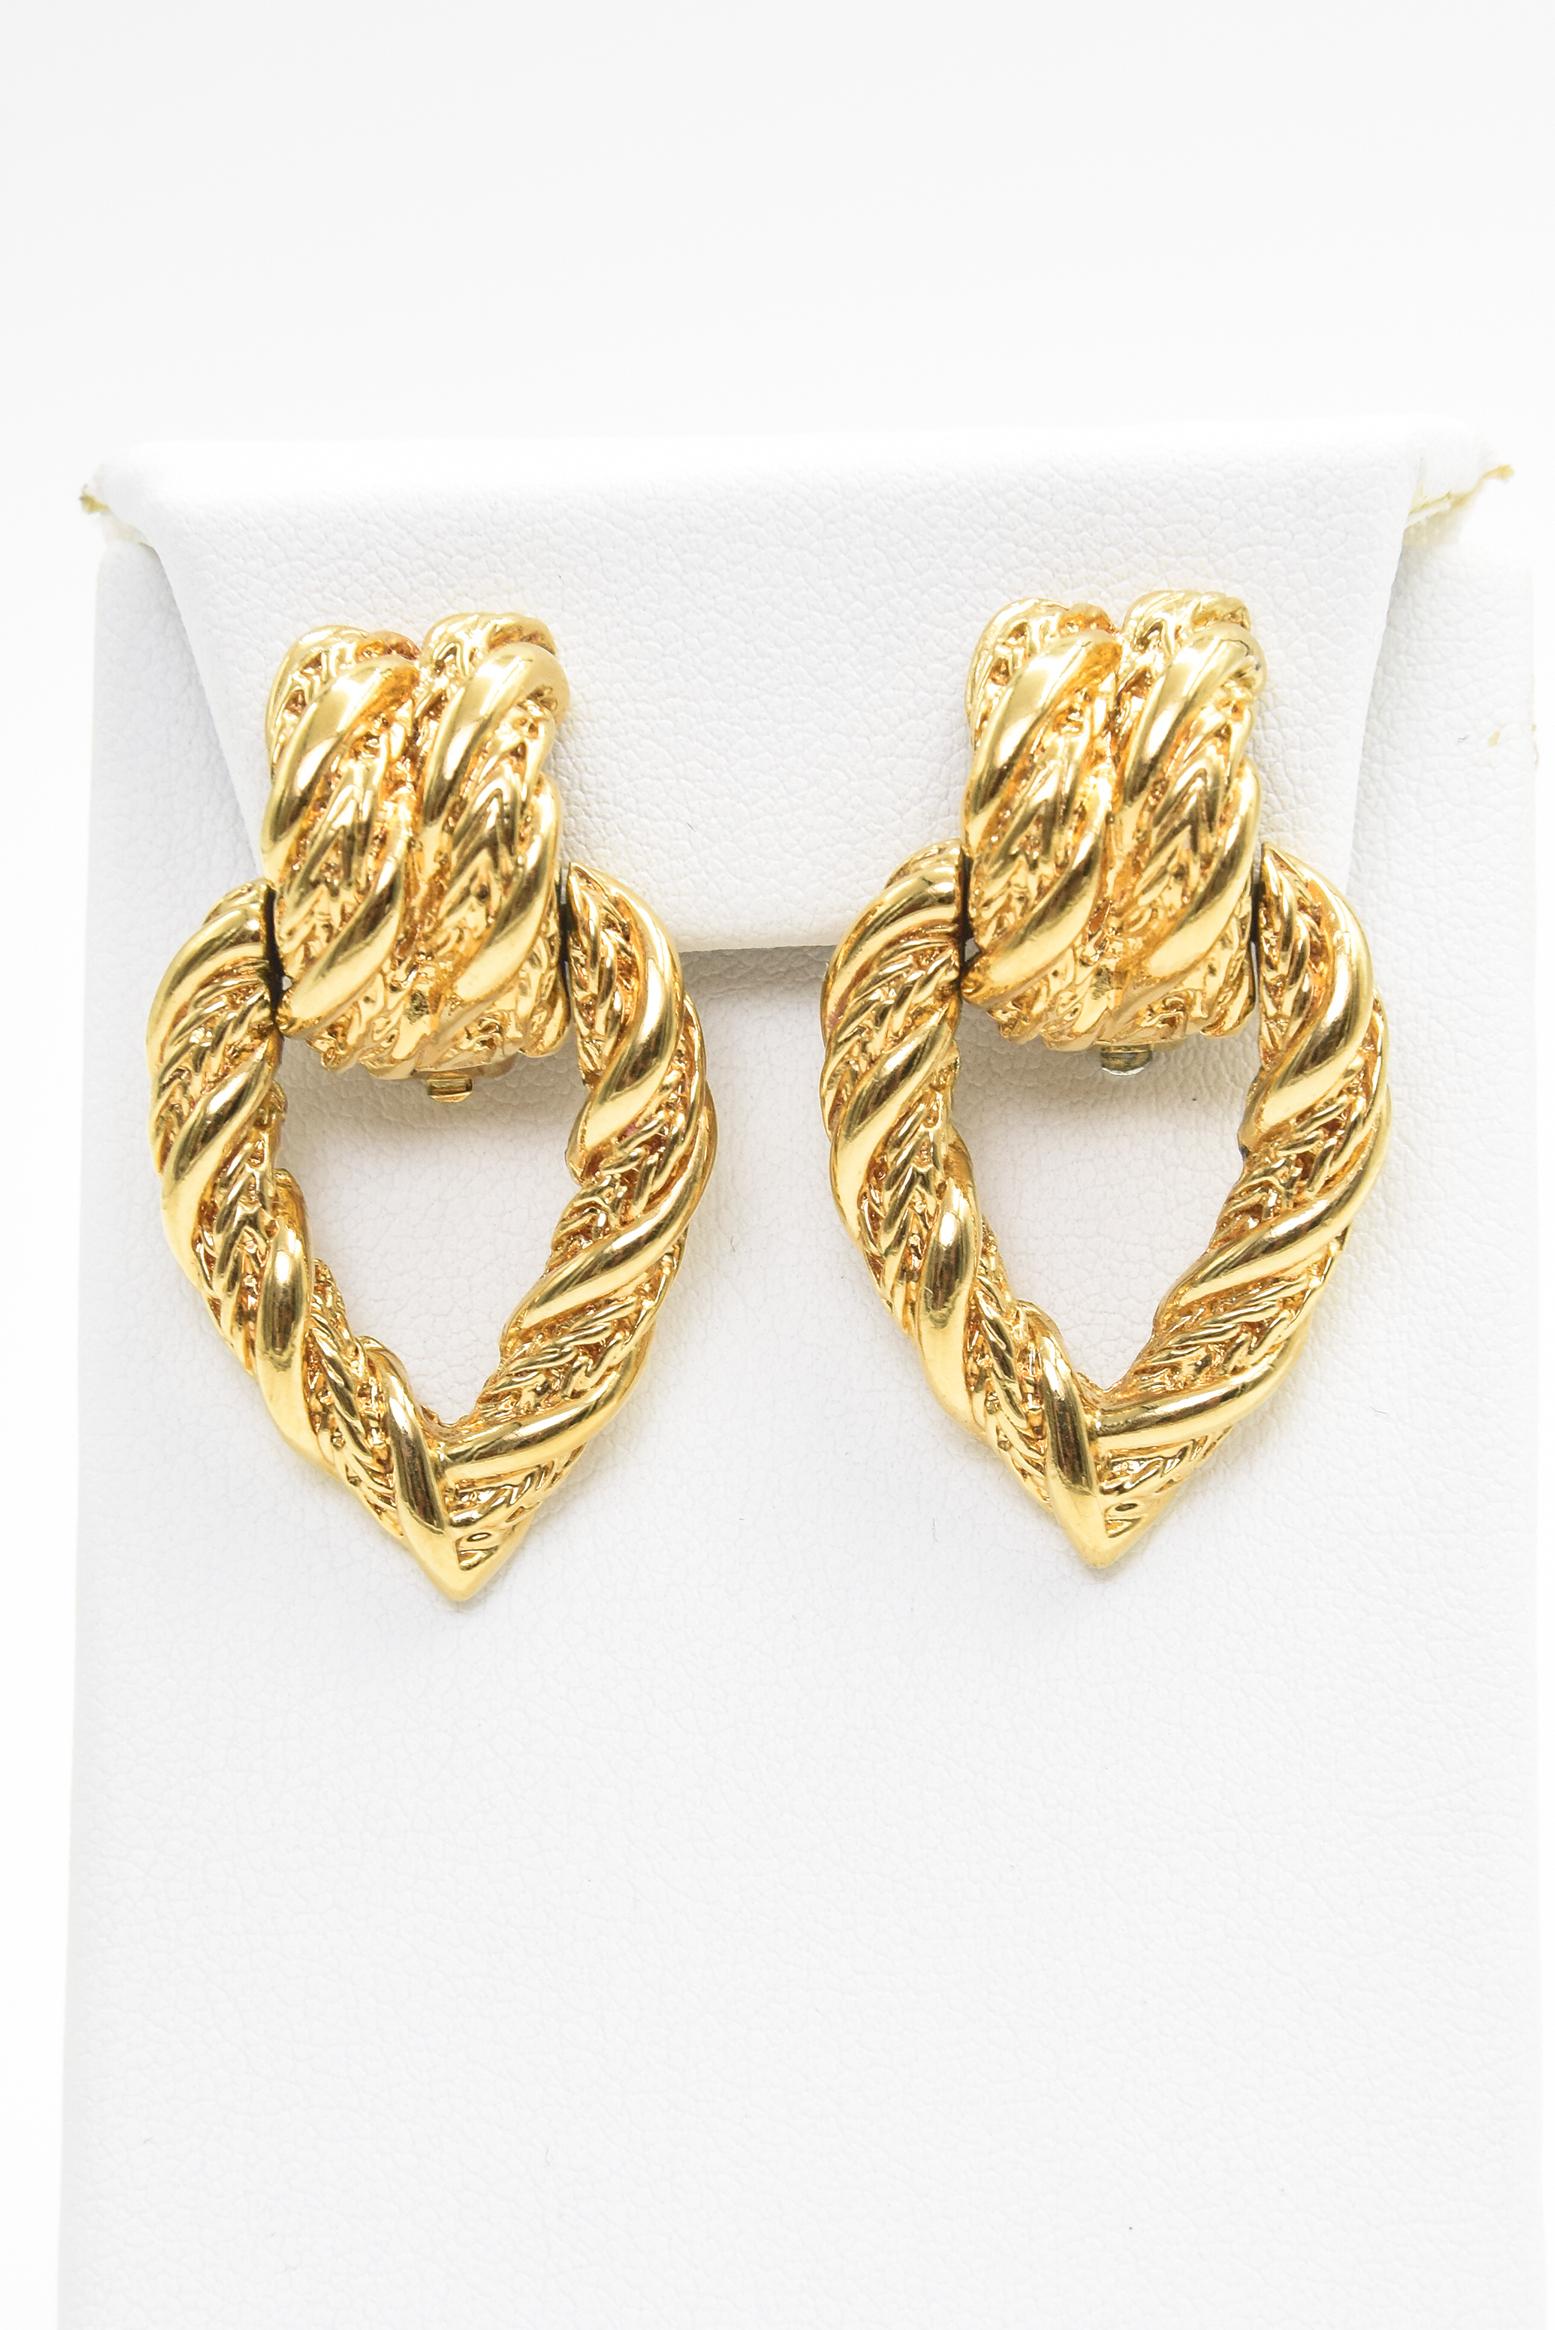 Vintage nicely made between the 1960-1970s gold toned textures clip on earrings contains a double bridge design from which an open tear drop hangs,  No post so easy to wear for everyone.